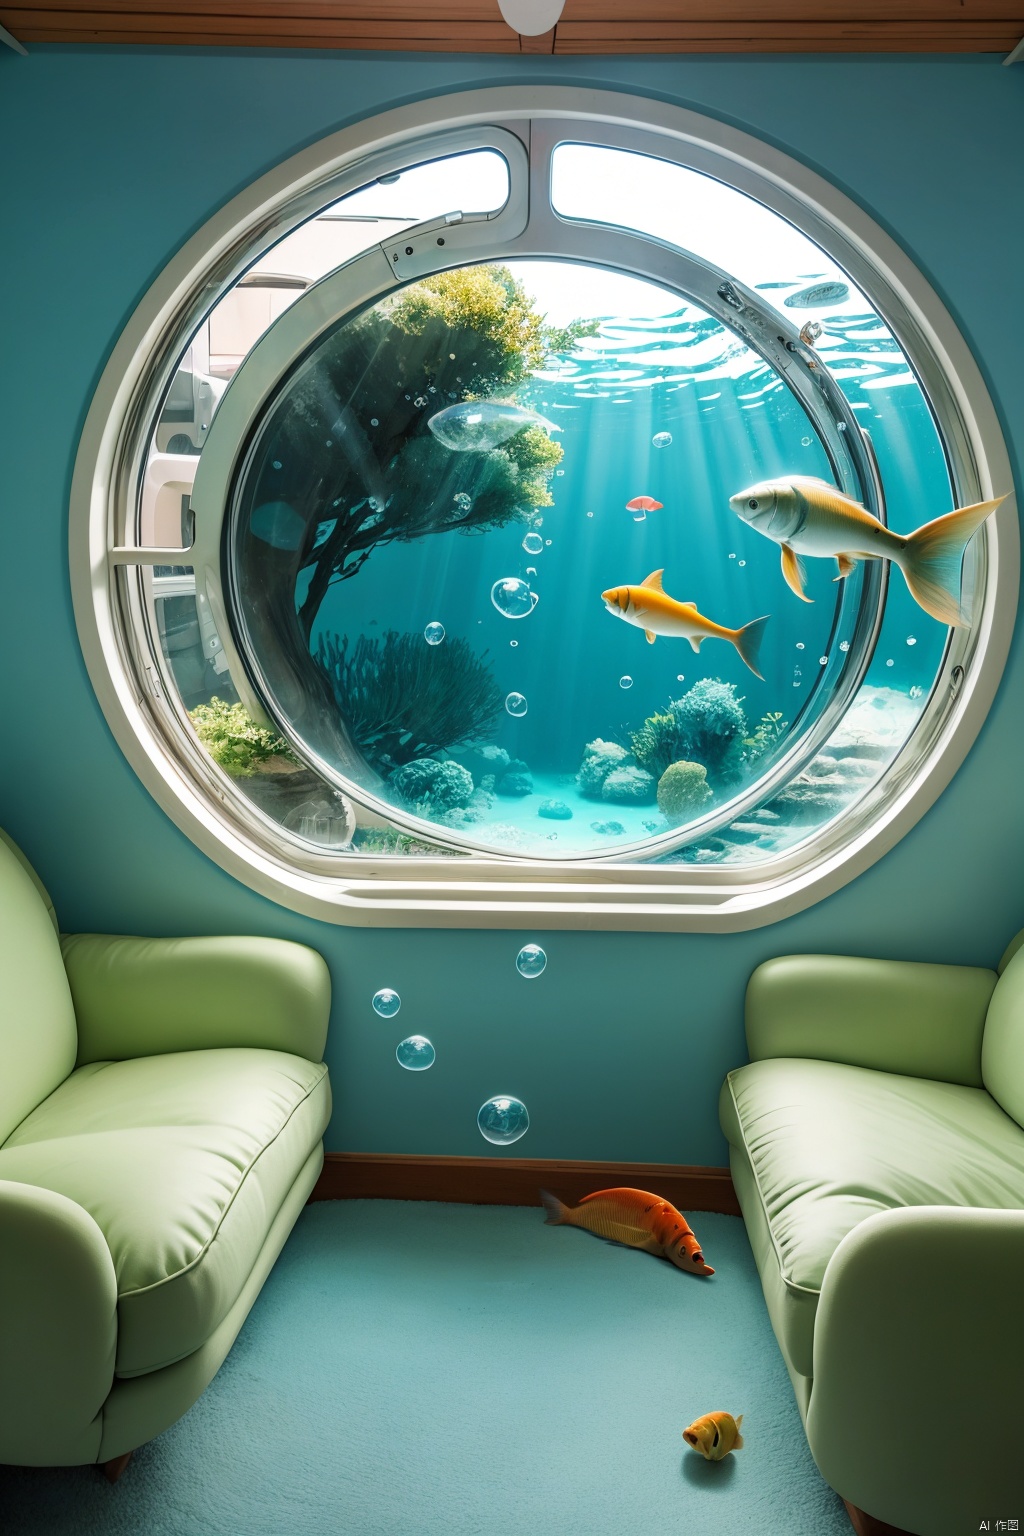  indoors, no humans, window, ground vehicle, scenery, fish, bubble, underwater, air bubble, train interior